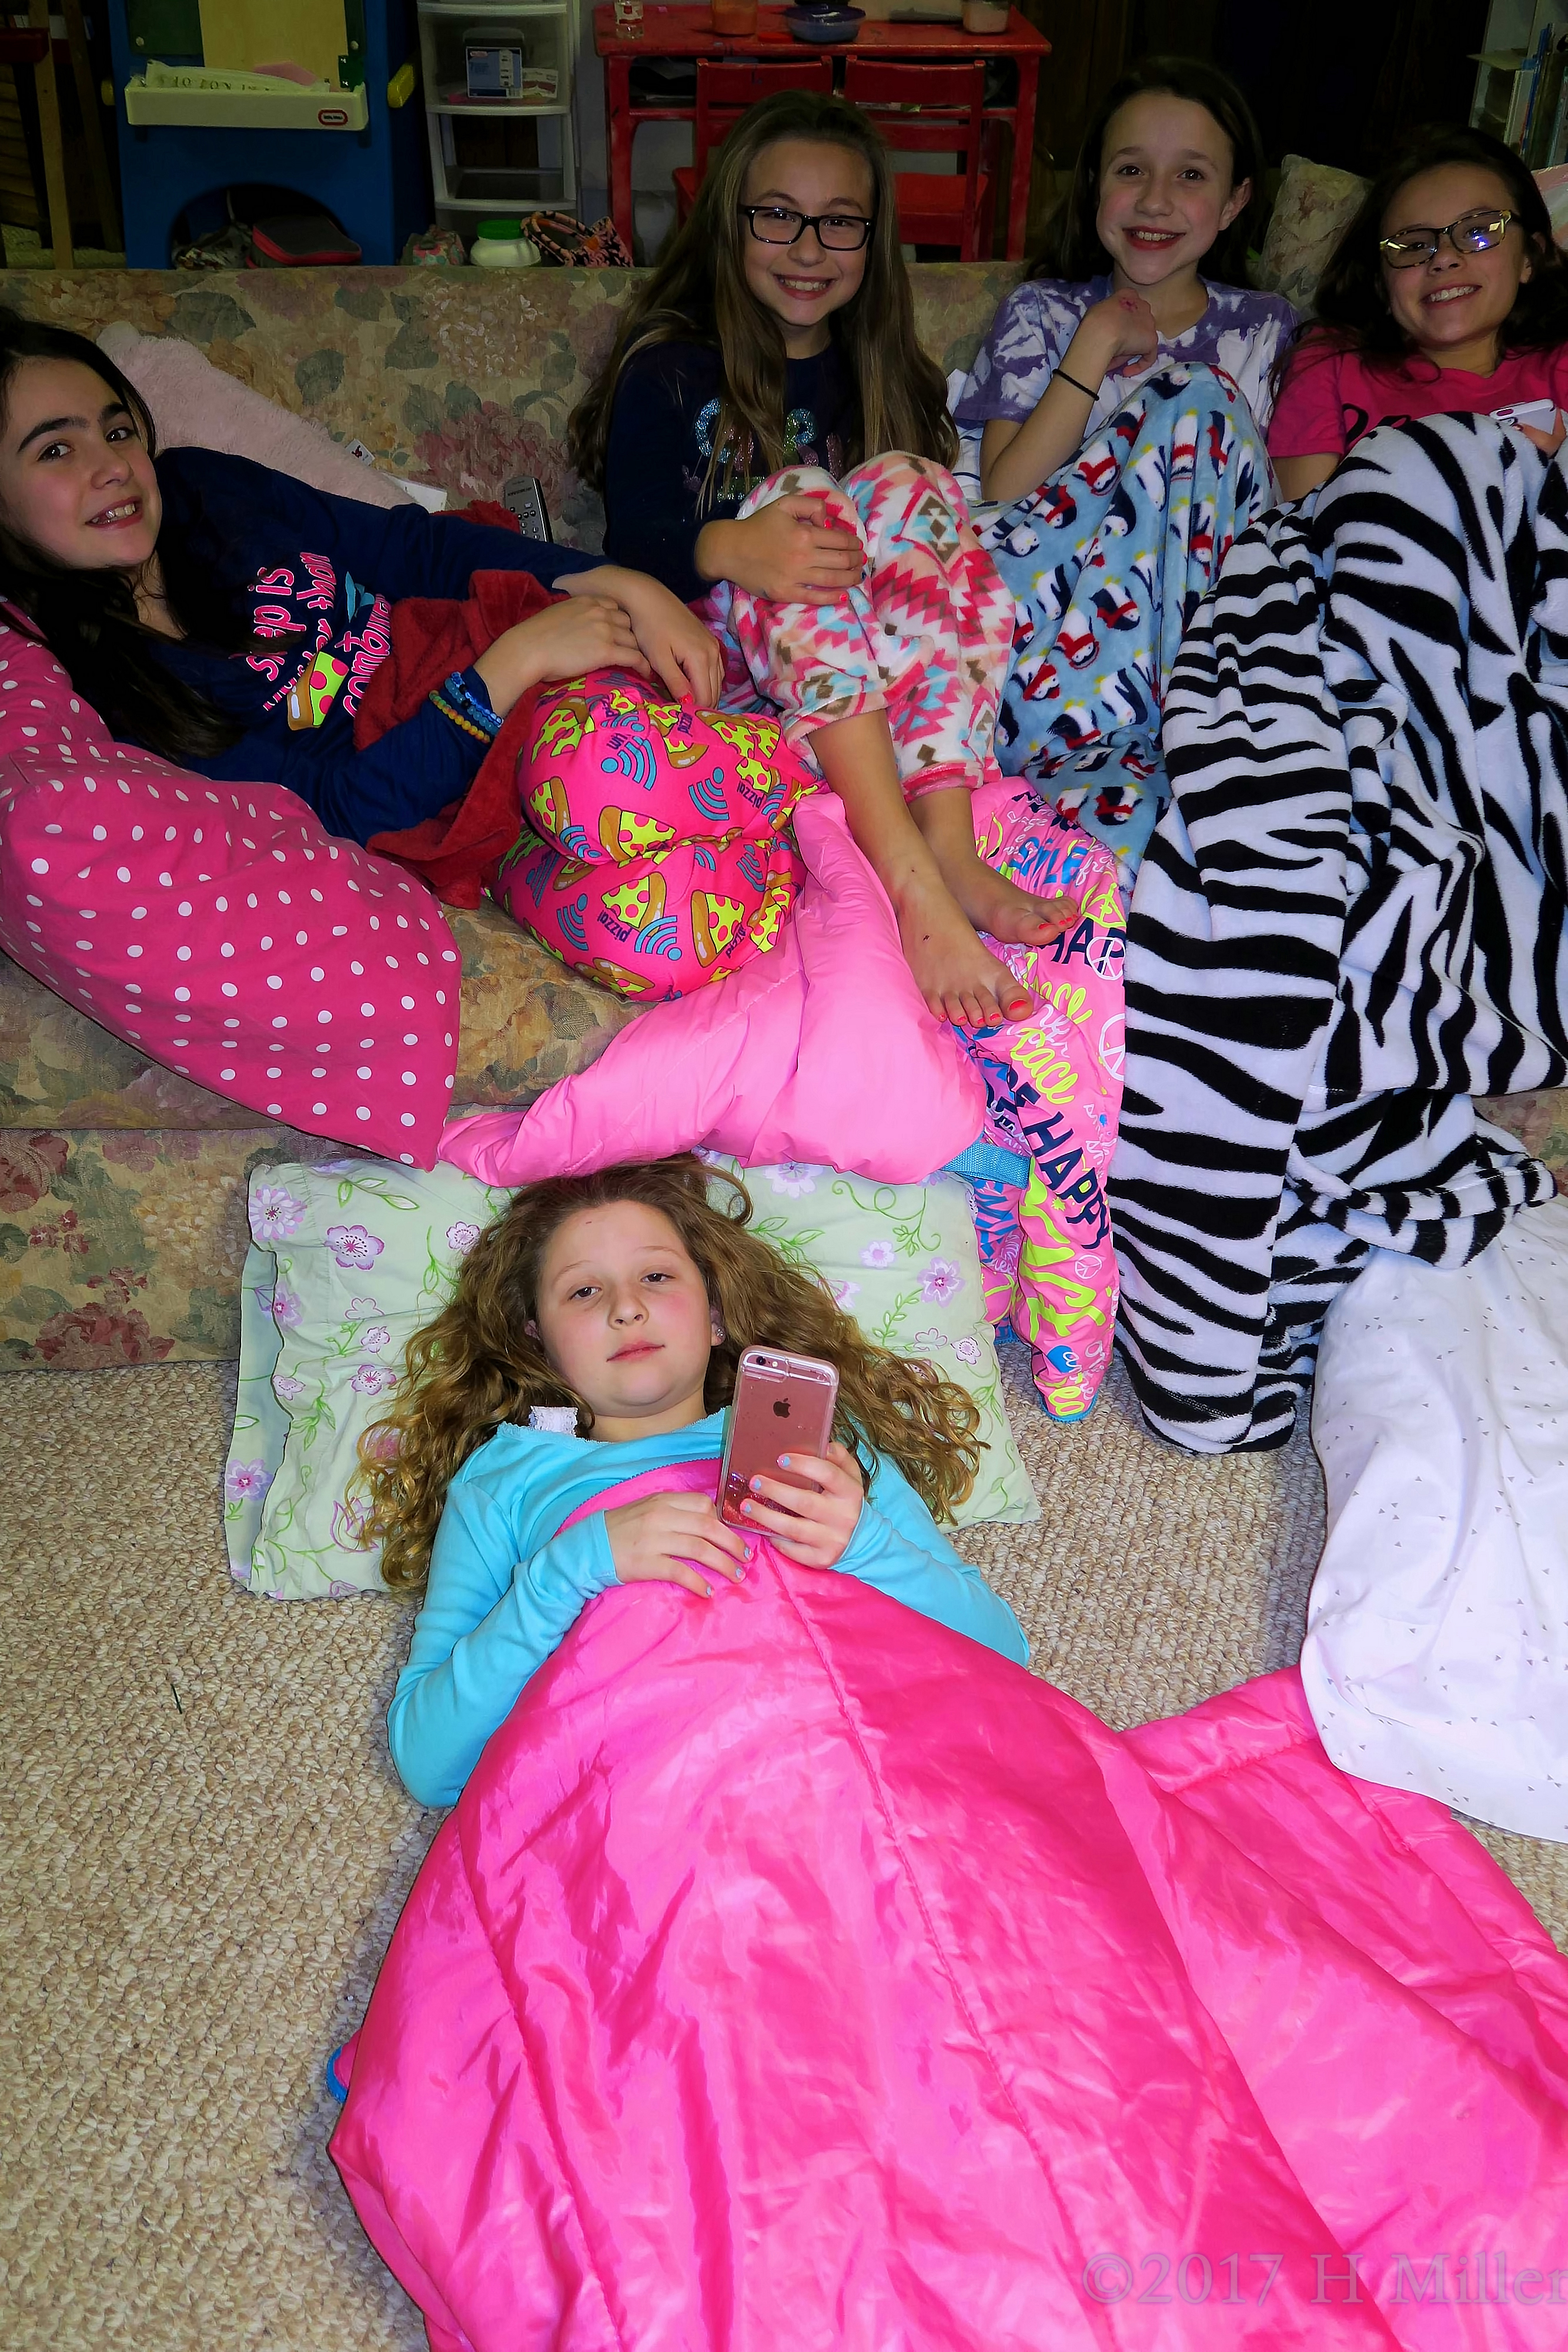 Everyone Is Getting Ready For A Fun Sleepover Party! 4